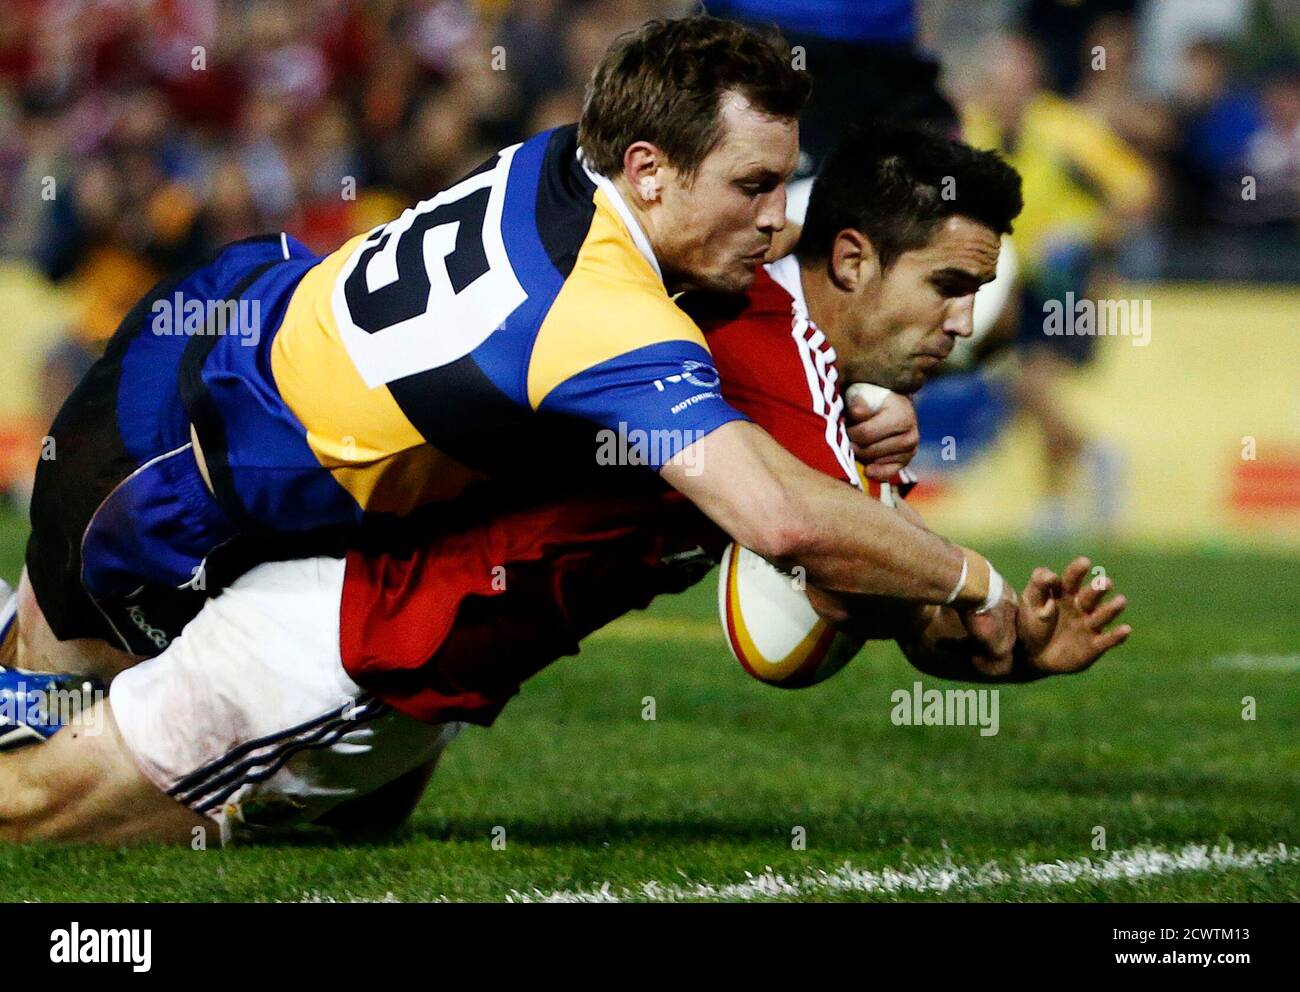 British and Irish Lions' Conor Murray (R) scores a try as Nathan Trist of the Combined NSW-Queensland Country fails to stop him during their rugby union game at Hunter Stadium in Newcastle June 11, 2013.   REUTERS/Daniel Munoz  (AUSTRALIA - Tags: SPORT RUGBY) Stock Photo